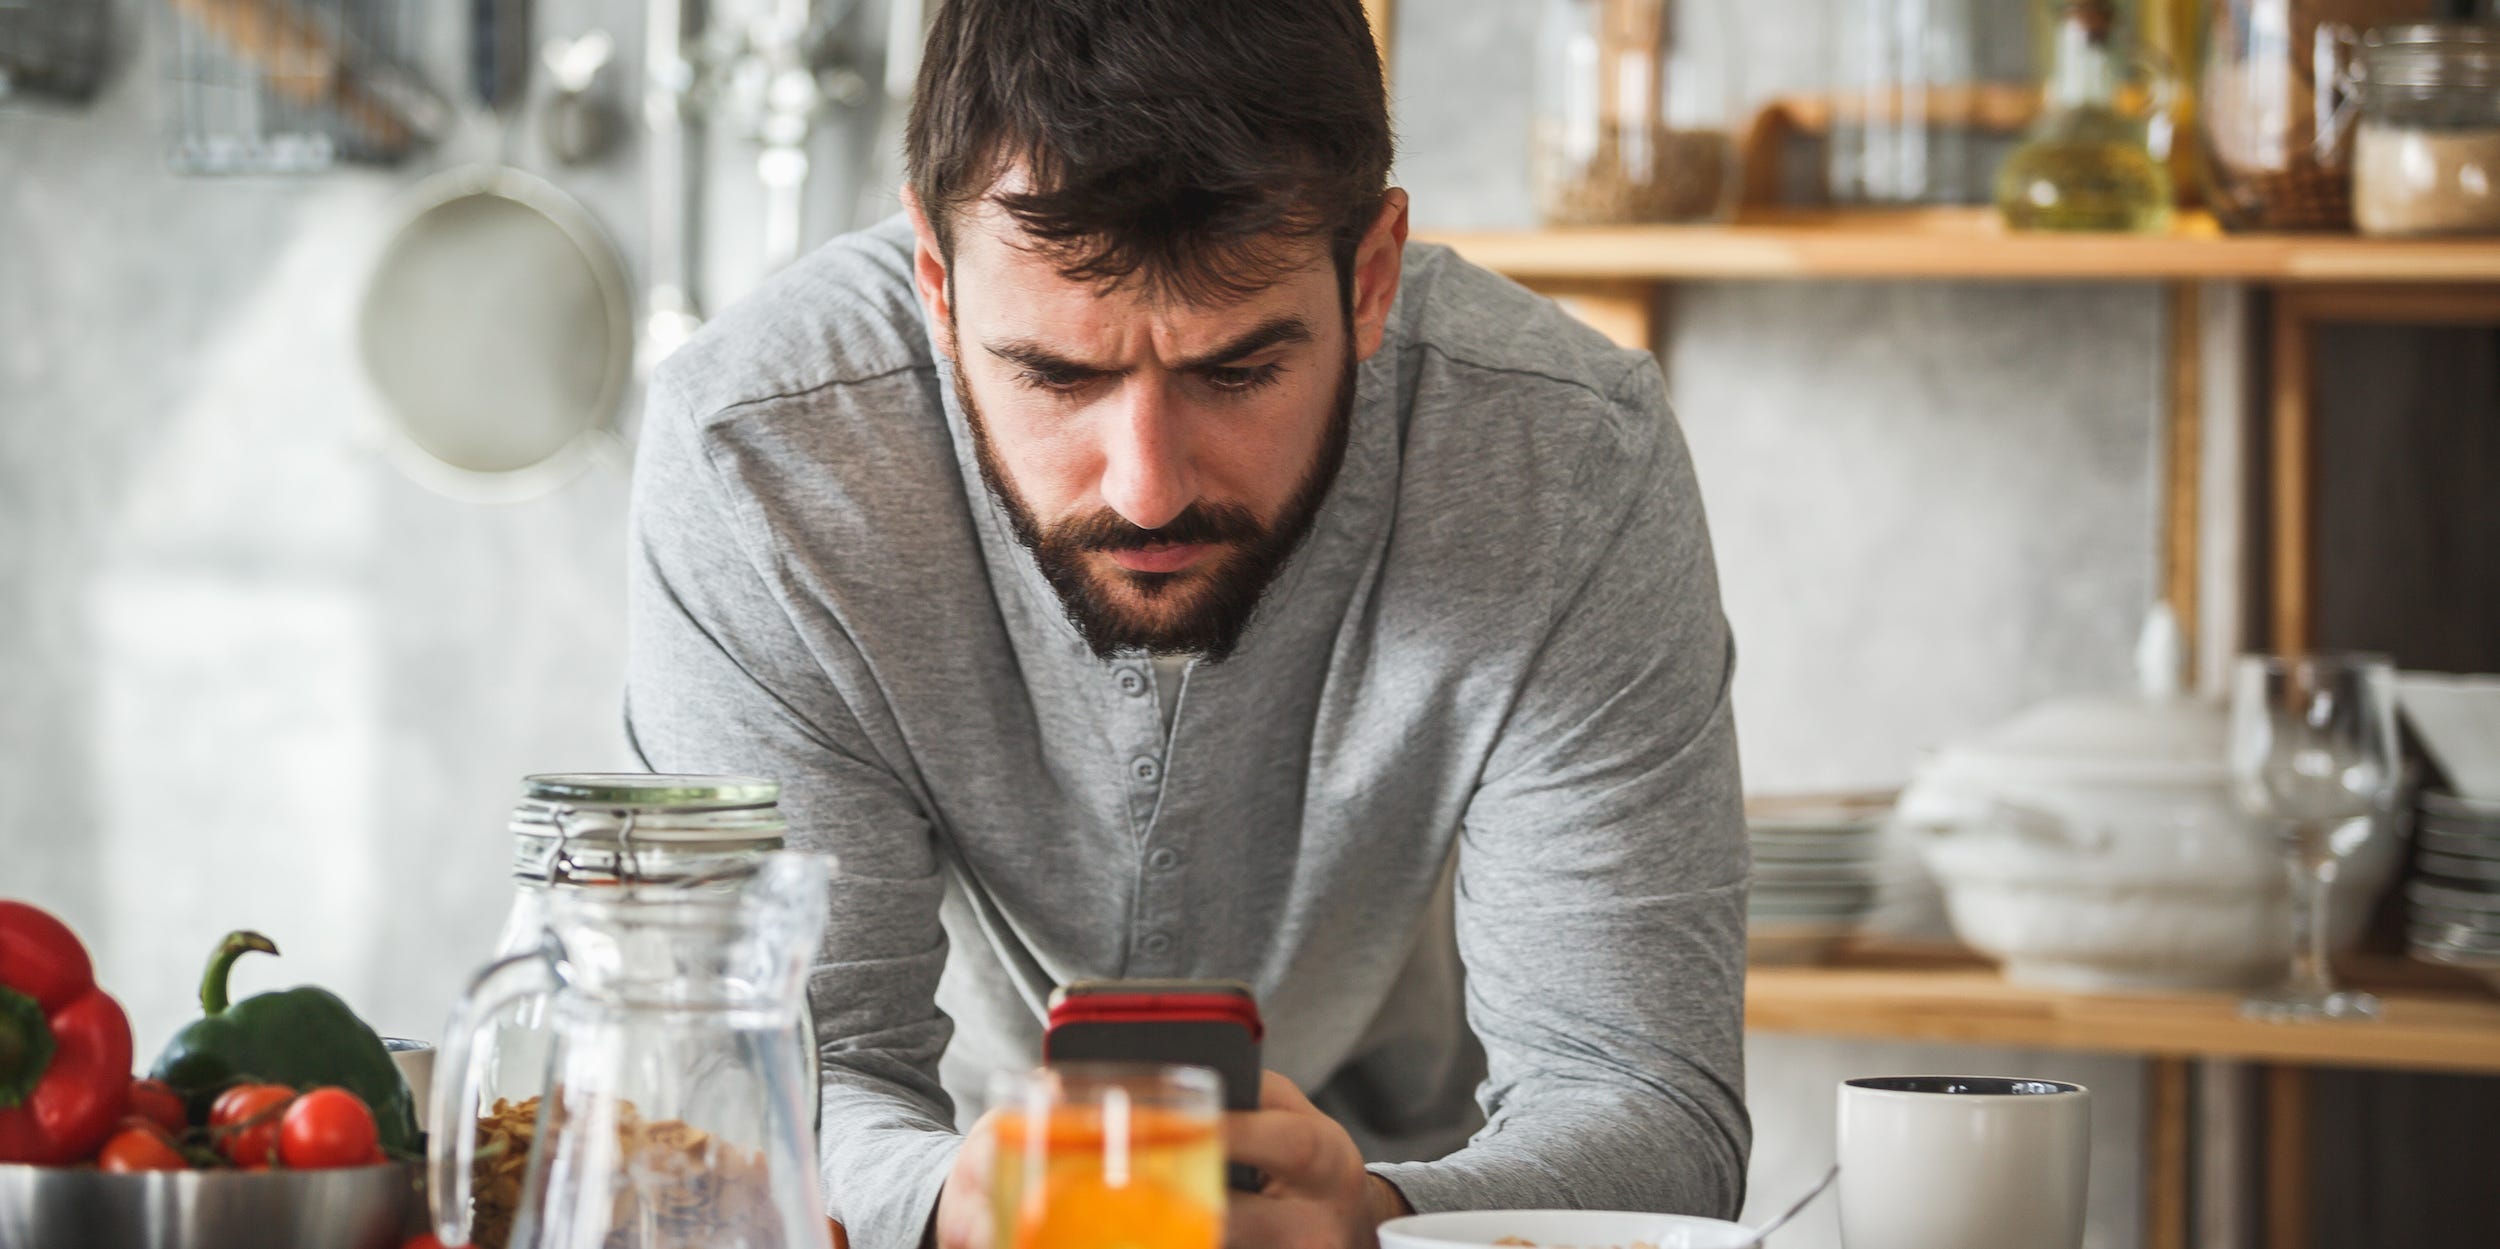 A man frowns at his phone as he stands over a kitchen counter of food.